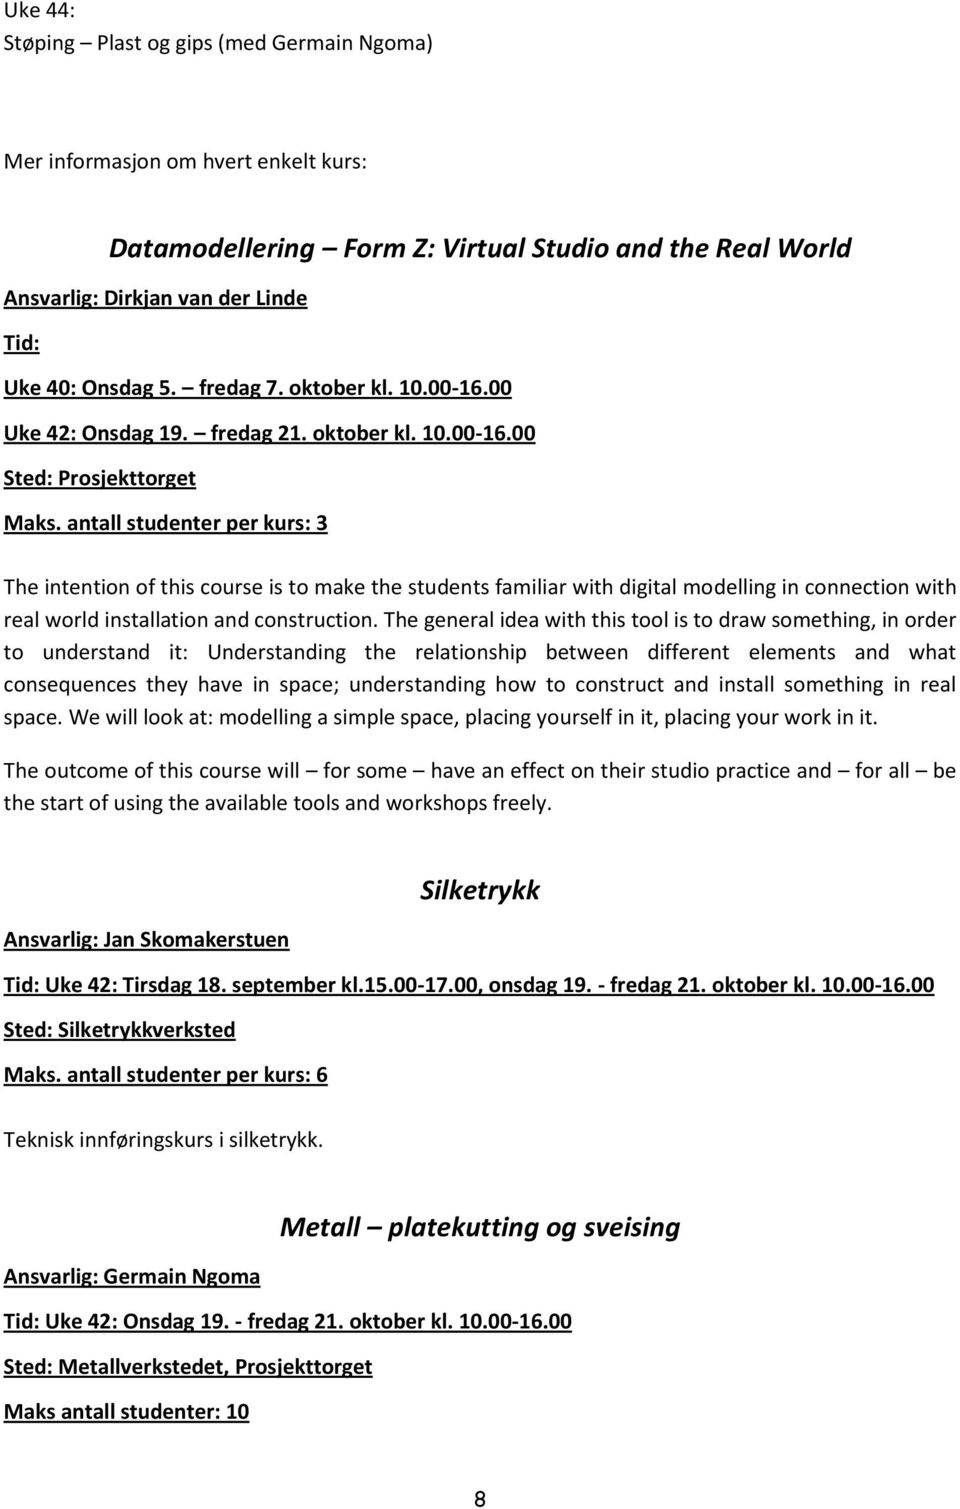 antall studenter per kurs: 3 The intention of this course is to make the students familiar with digital modelling in connection with real world installation and construction.